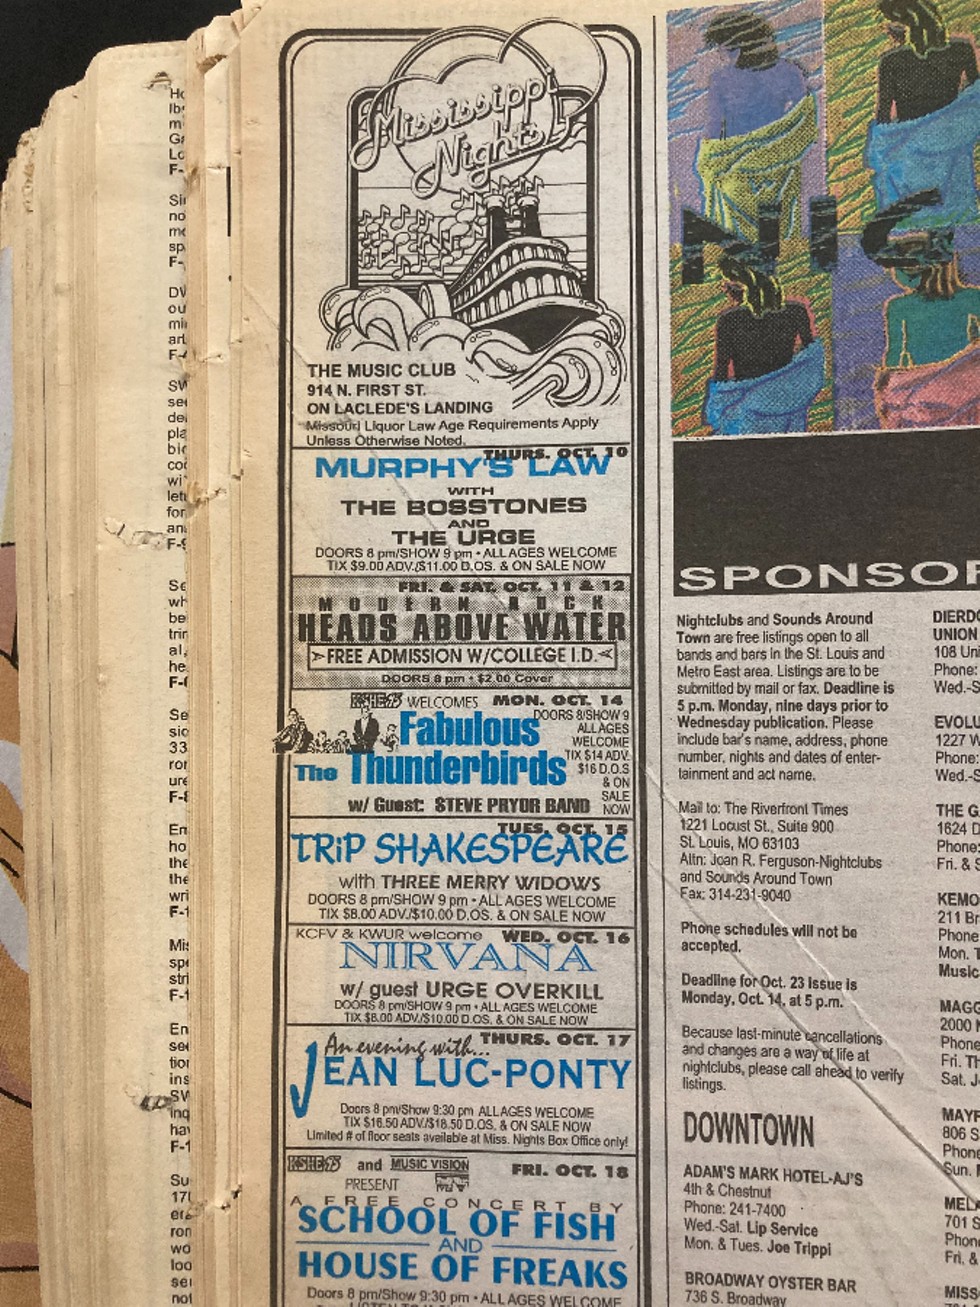 A Mississippi Nights advertisement in the pages of the RFT the week before the show. - VIA RFT ARCHIVES